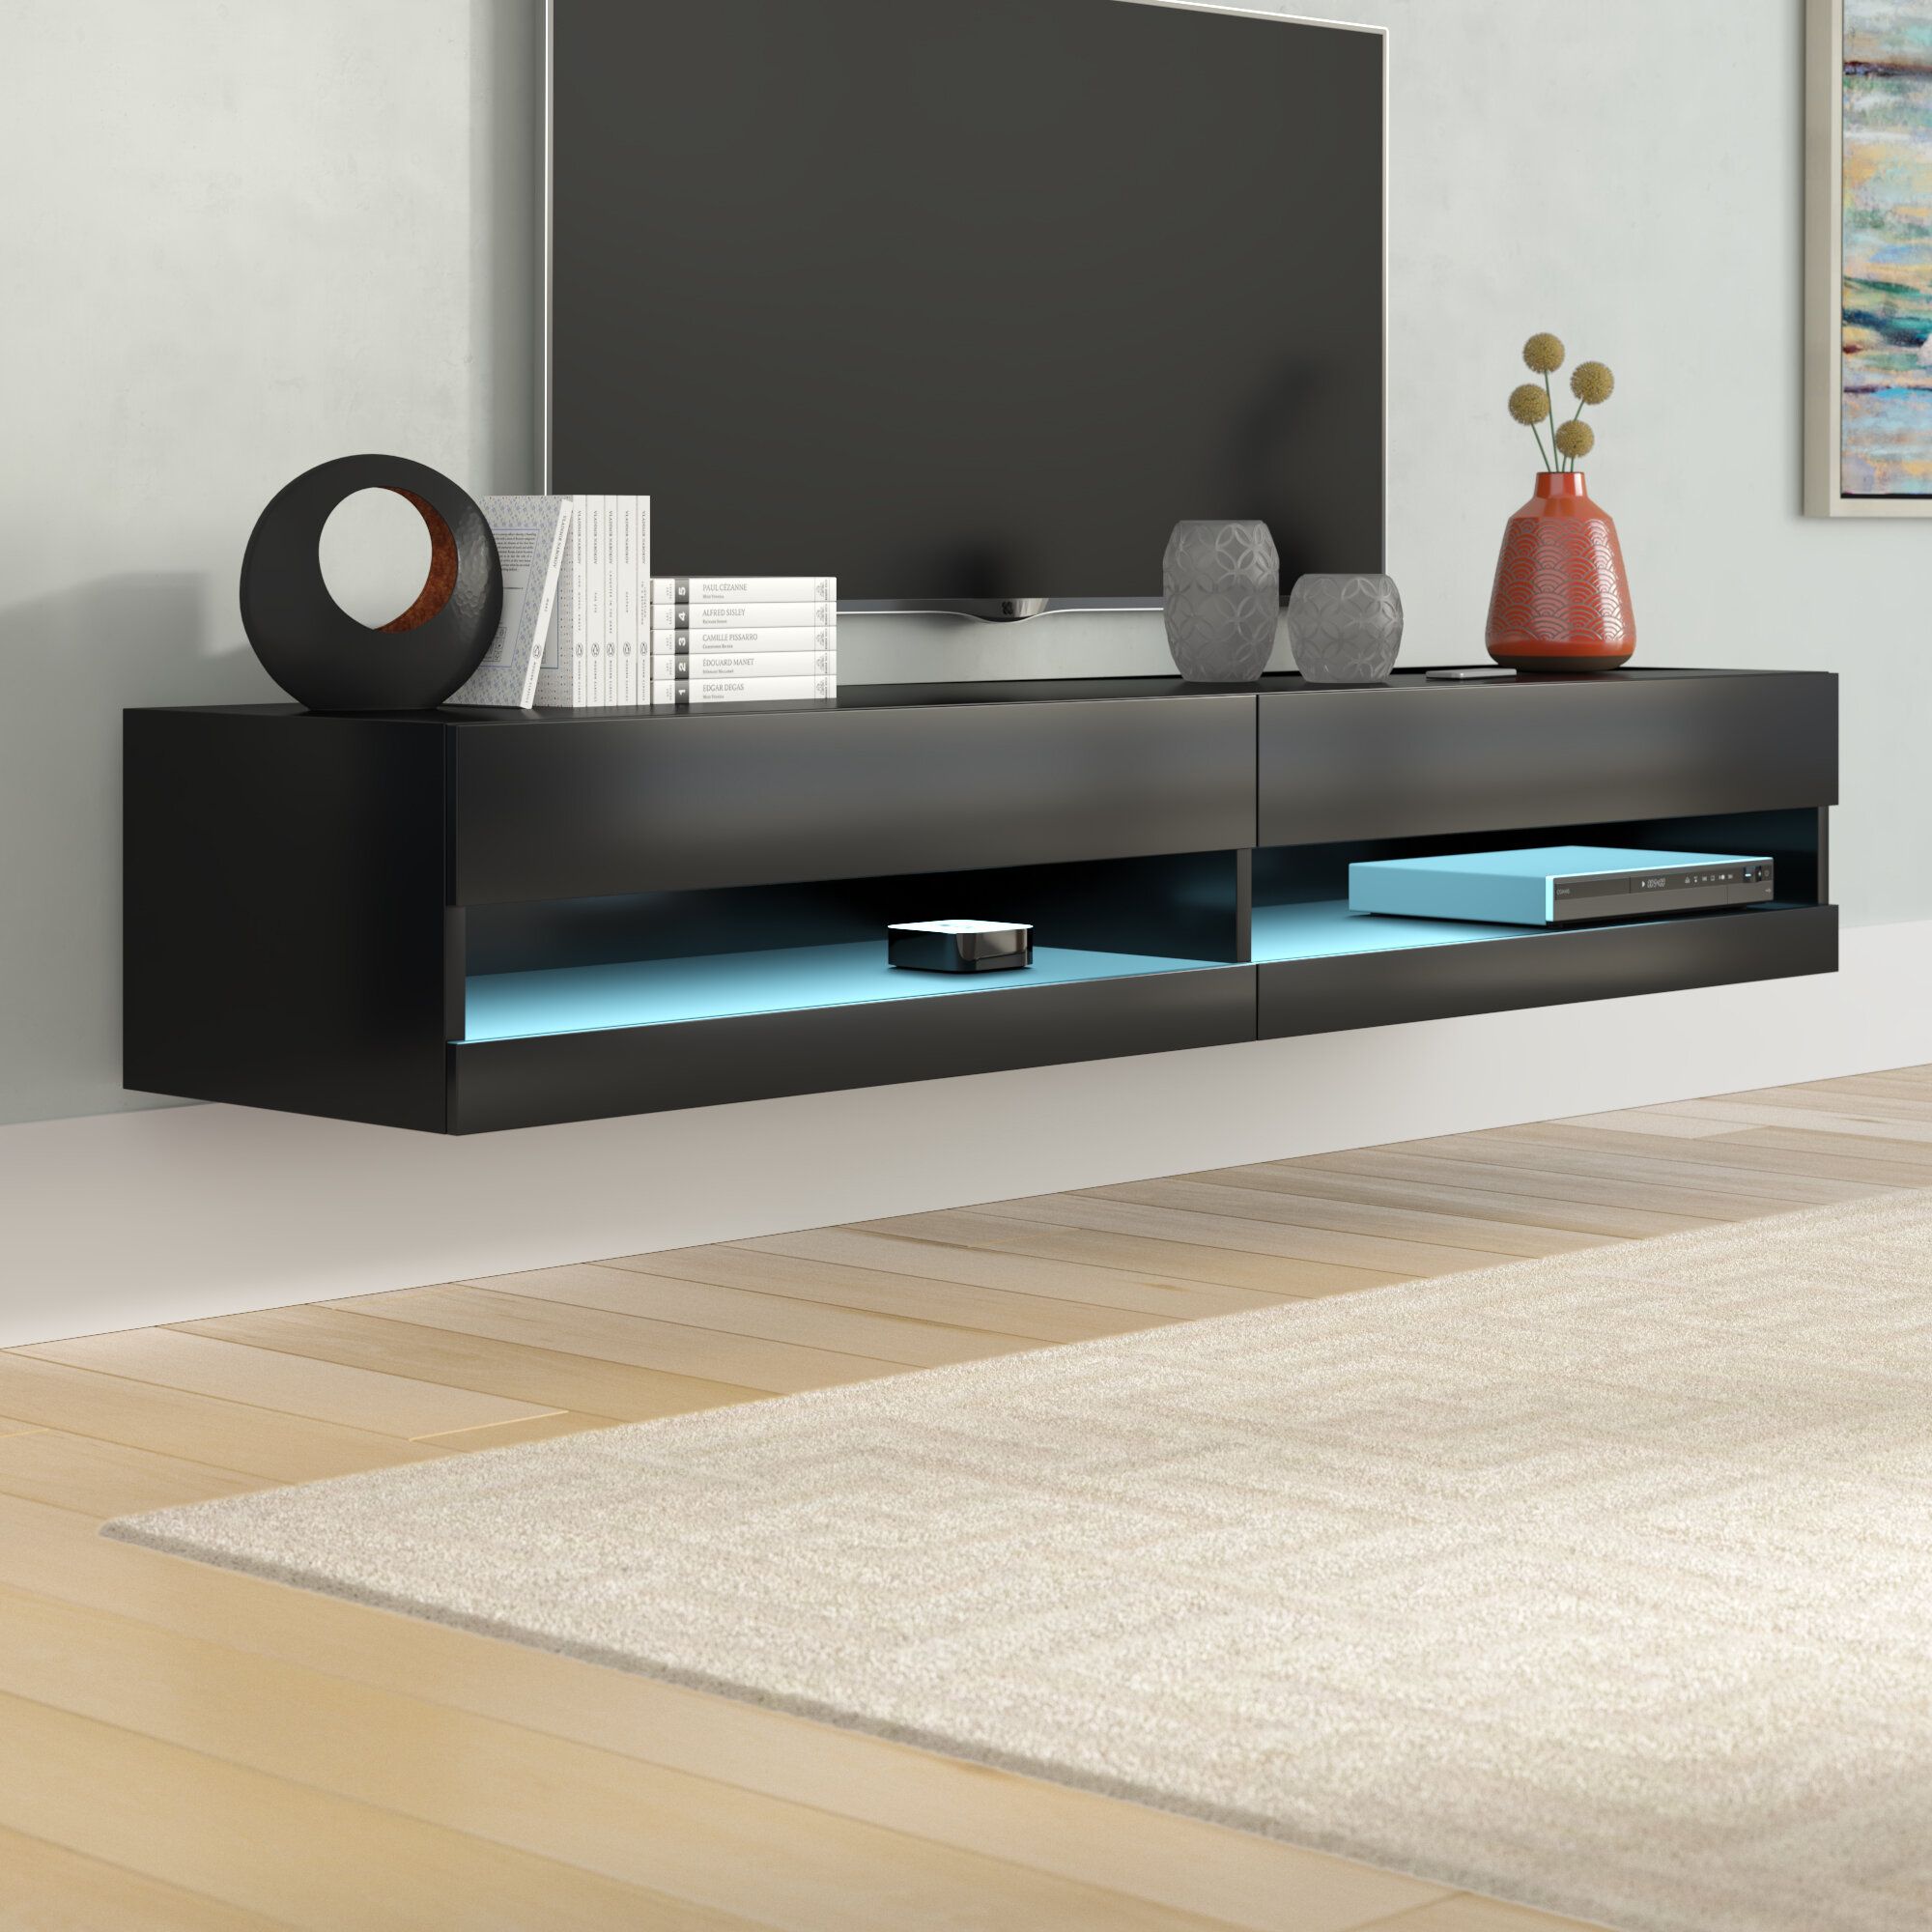 Orren Ellis Ramsdell Floating Tv Stand For Tvs Up To 78" & Reviews | Wayfair In Floating Stands For Tvs (Photo 2 of 15)